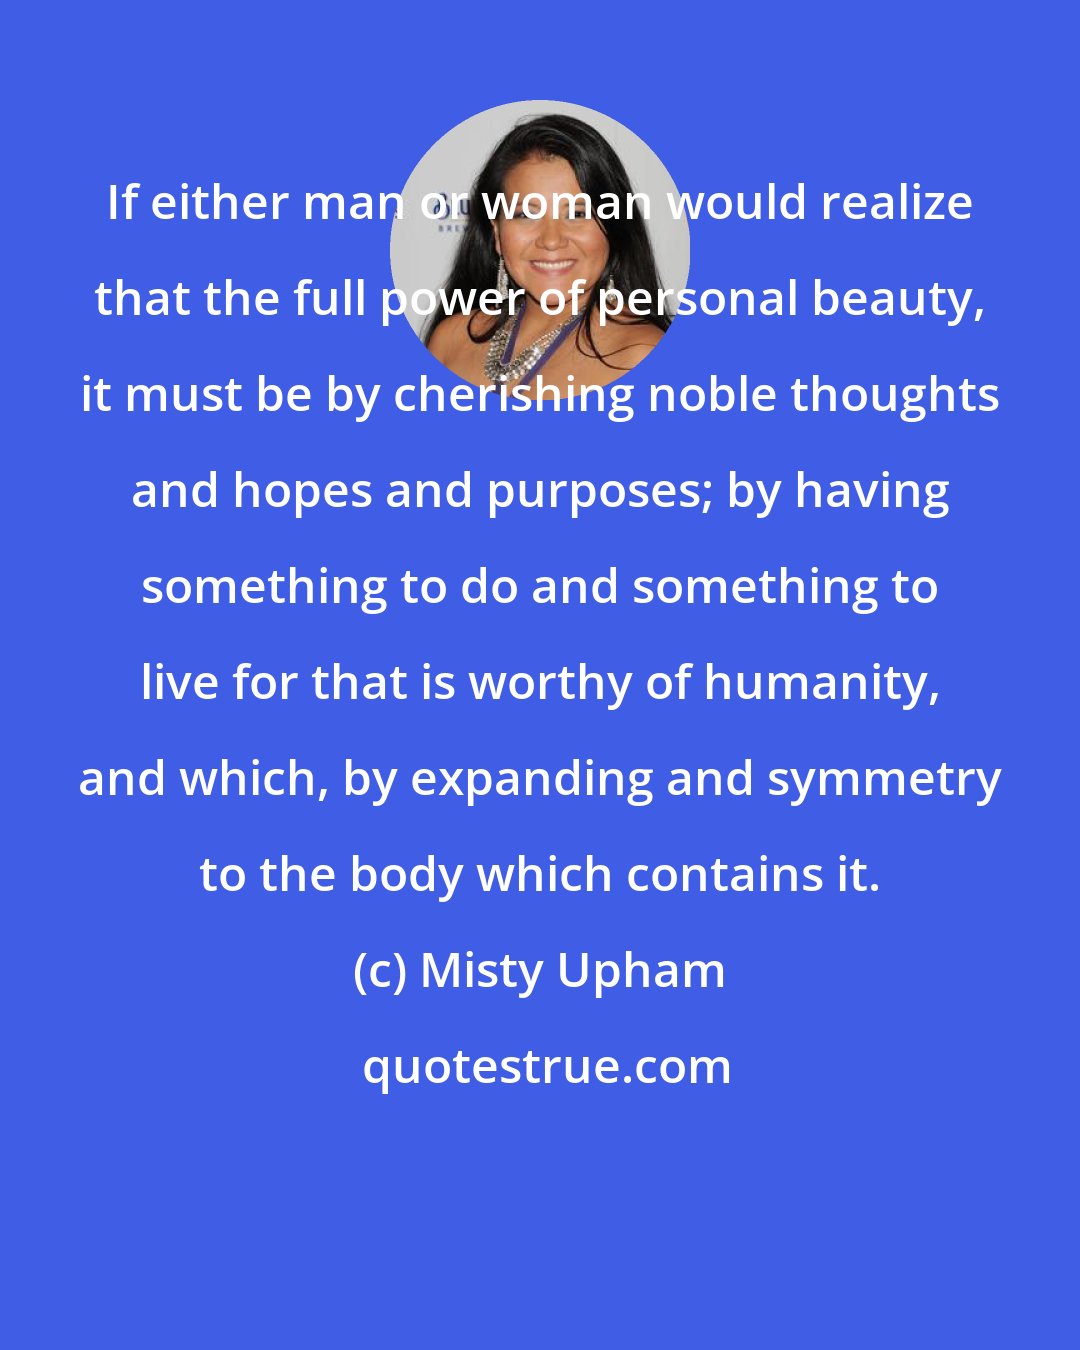 Misty Upham: If either man or woman would realize that the full power of personal beauty, it must be by cherishing noble thoughts and hopes and purposes; by having something to do and something to live for that is worthy of humanity, and which, by expanding and symmetry to the body which contains it.